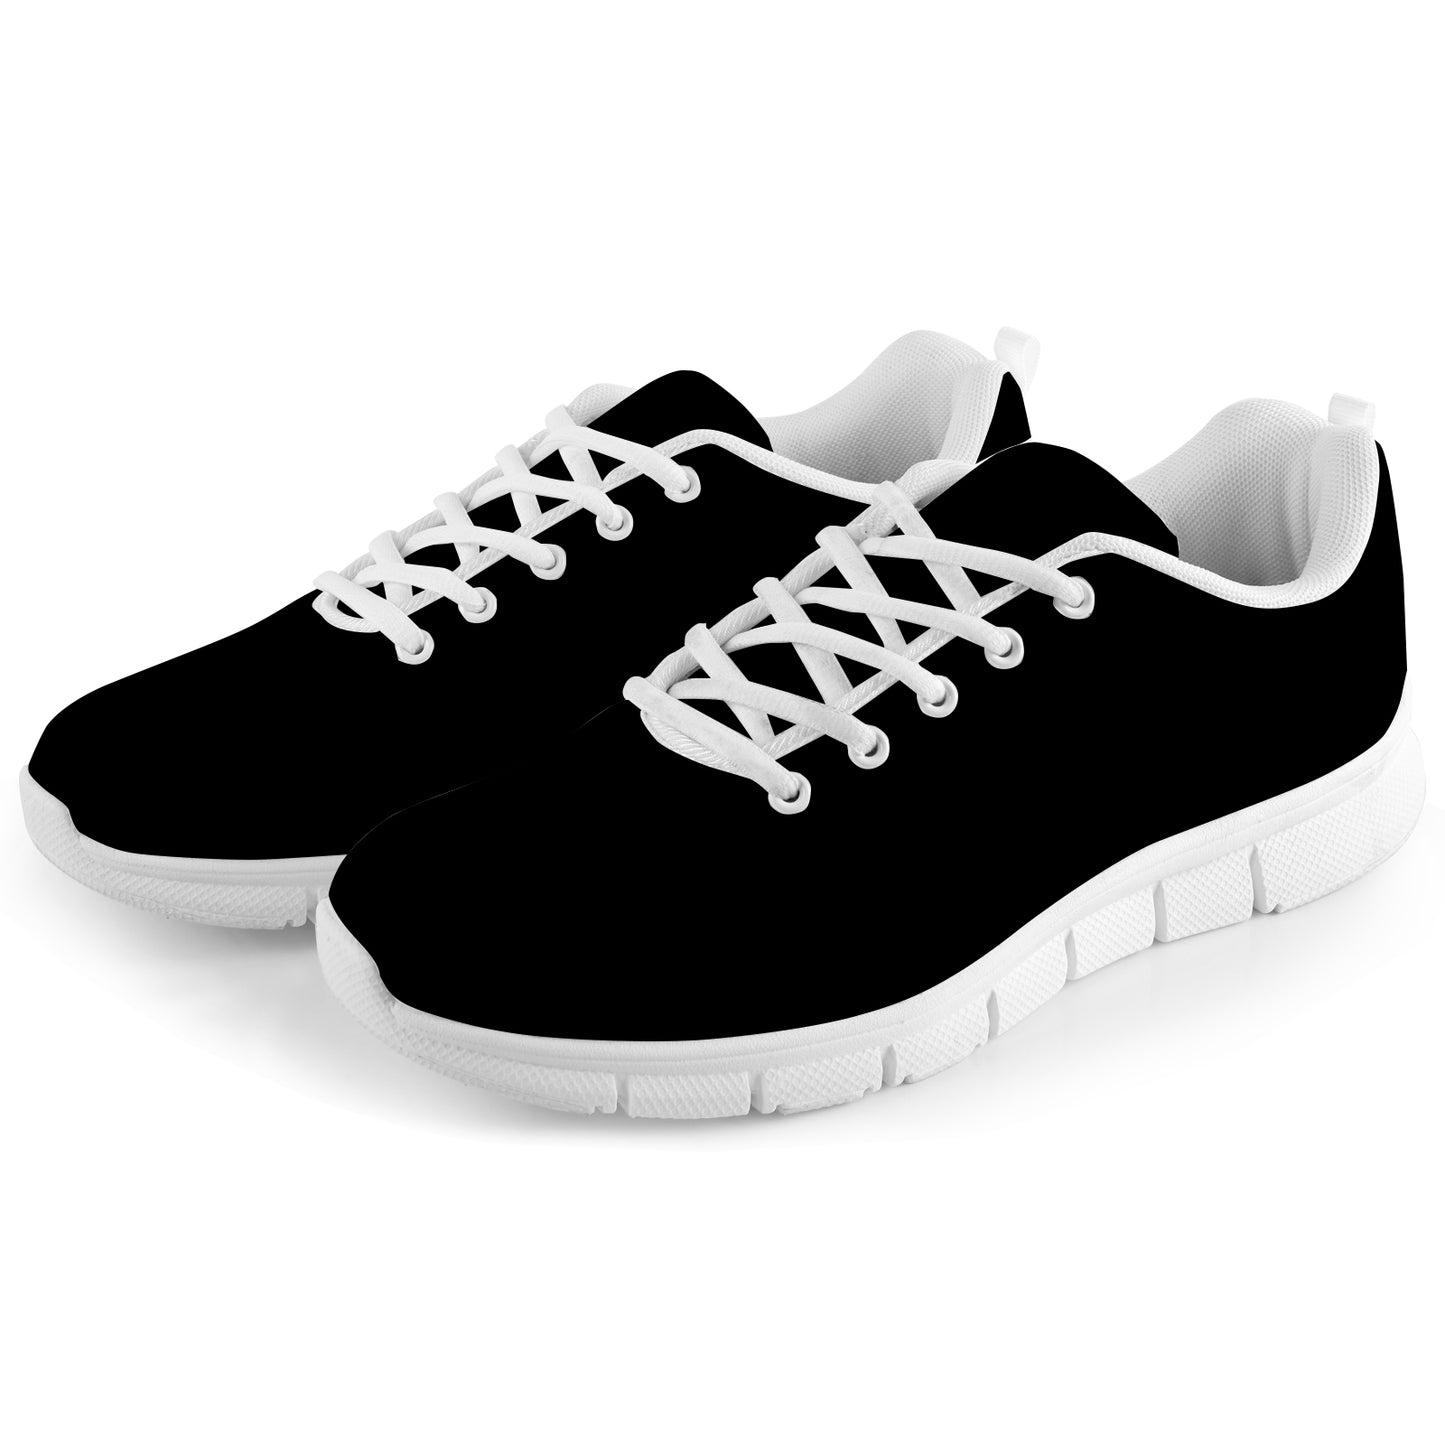 Men's Breathable Sneakers - Classic Black